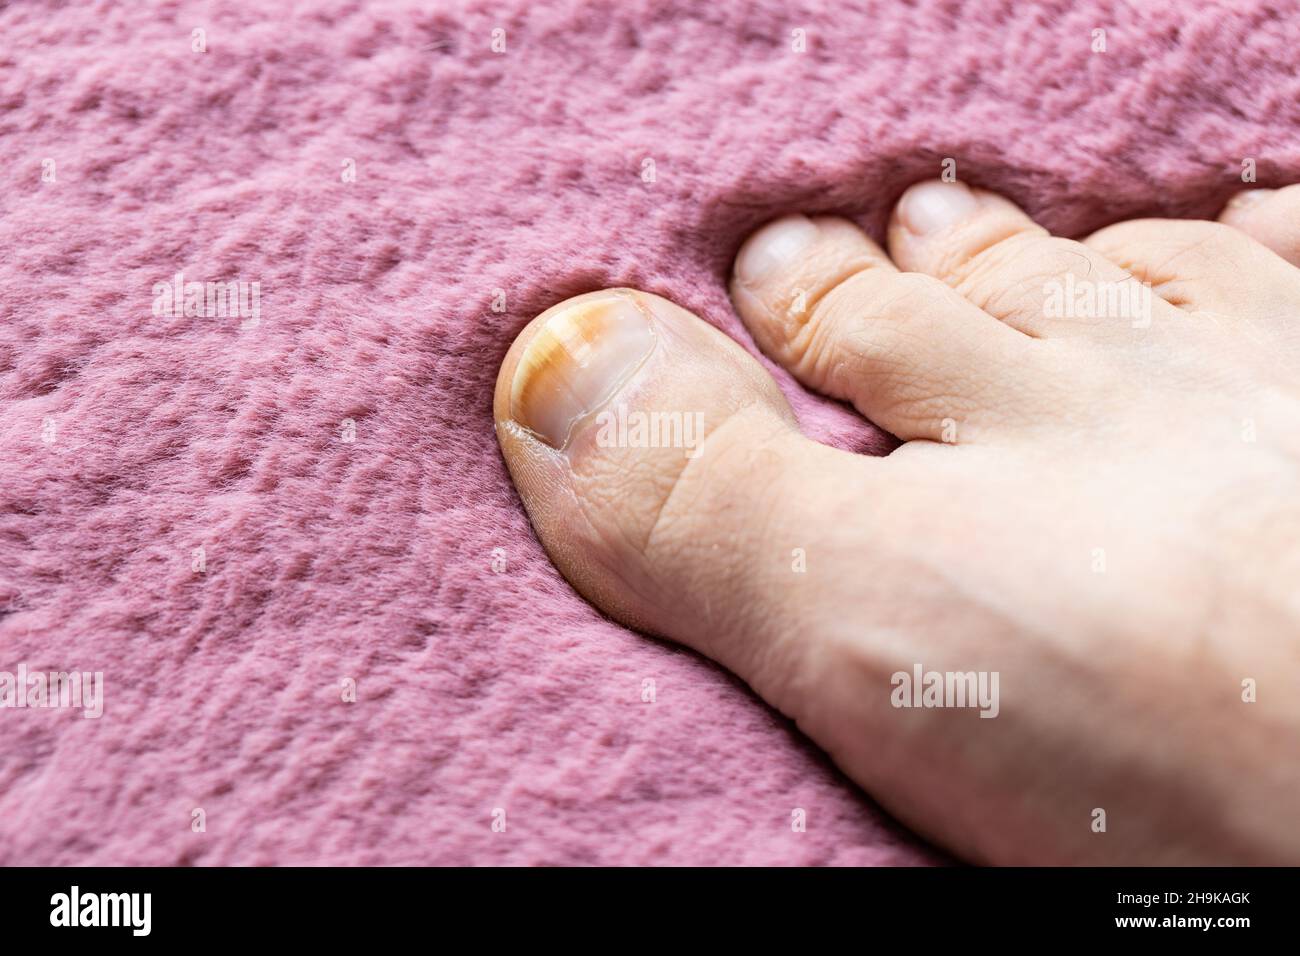 onychomycosis, the initial stage of ringworm. Big toe infected with fungal bacteria, Background pacific pink Stock Photo